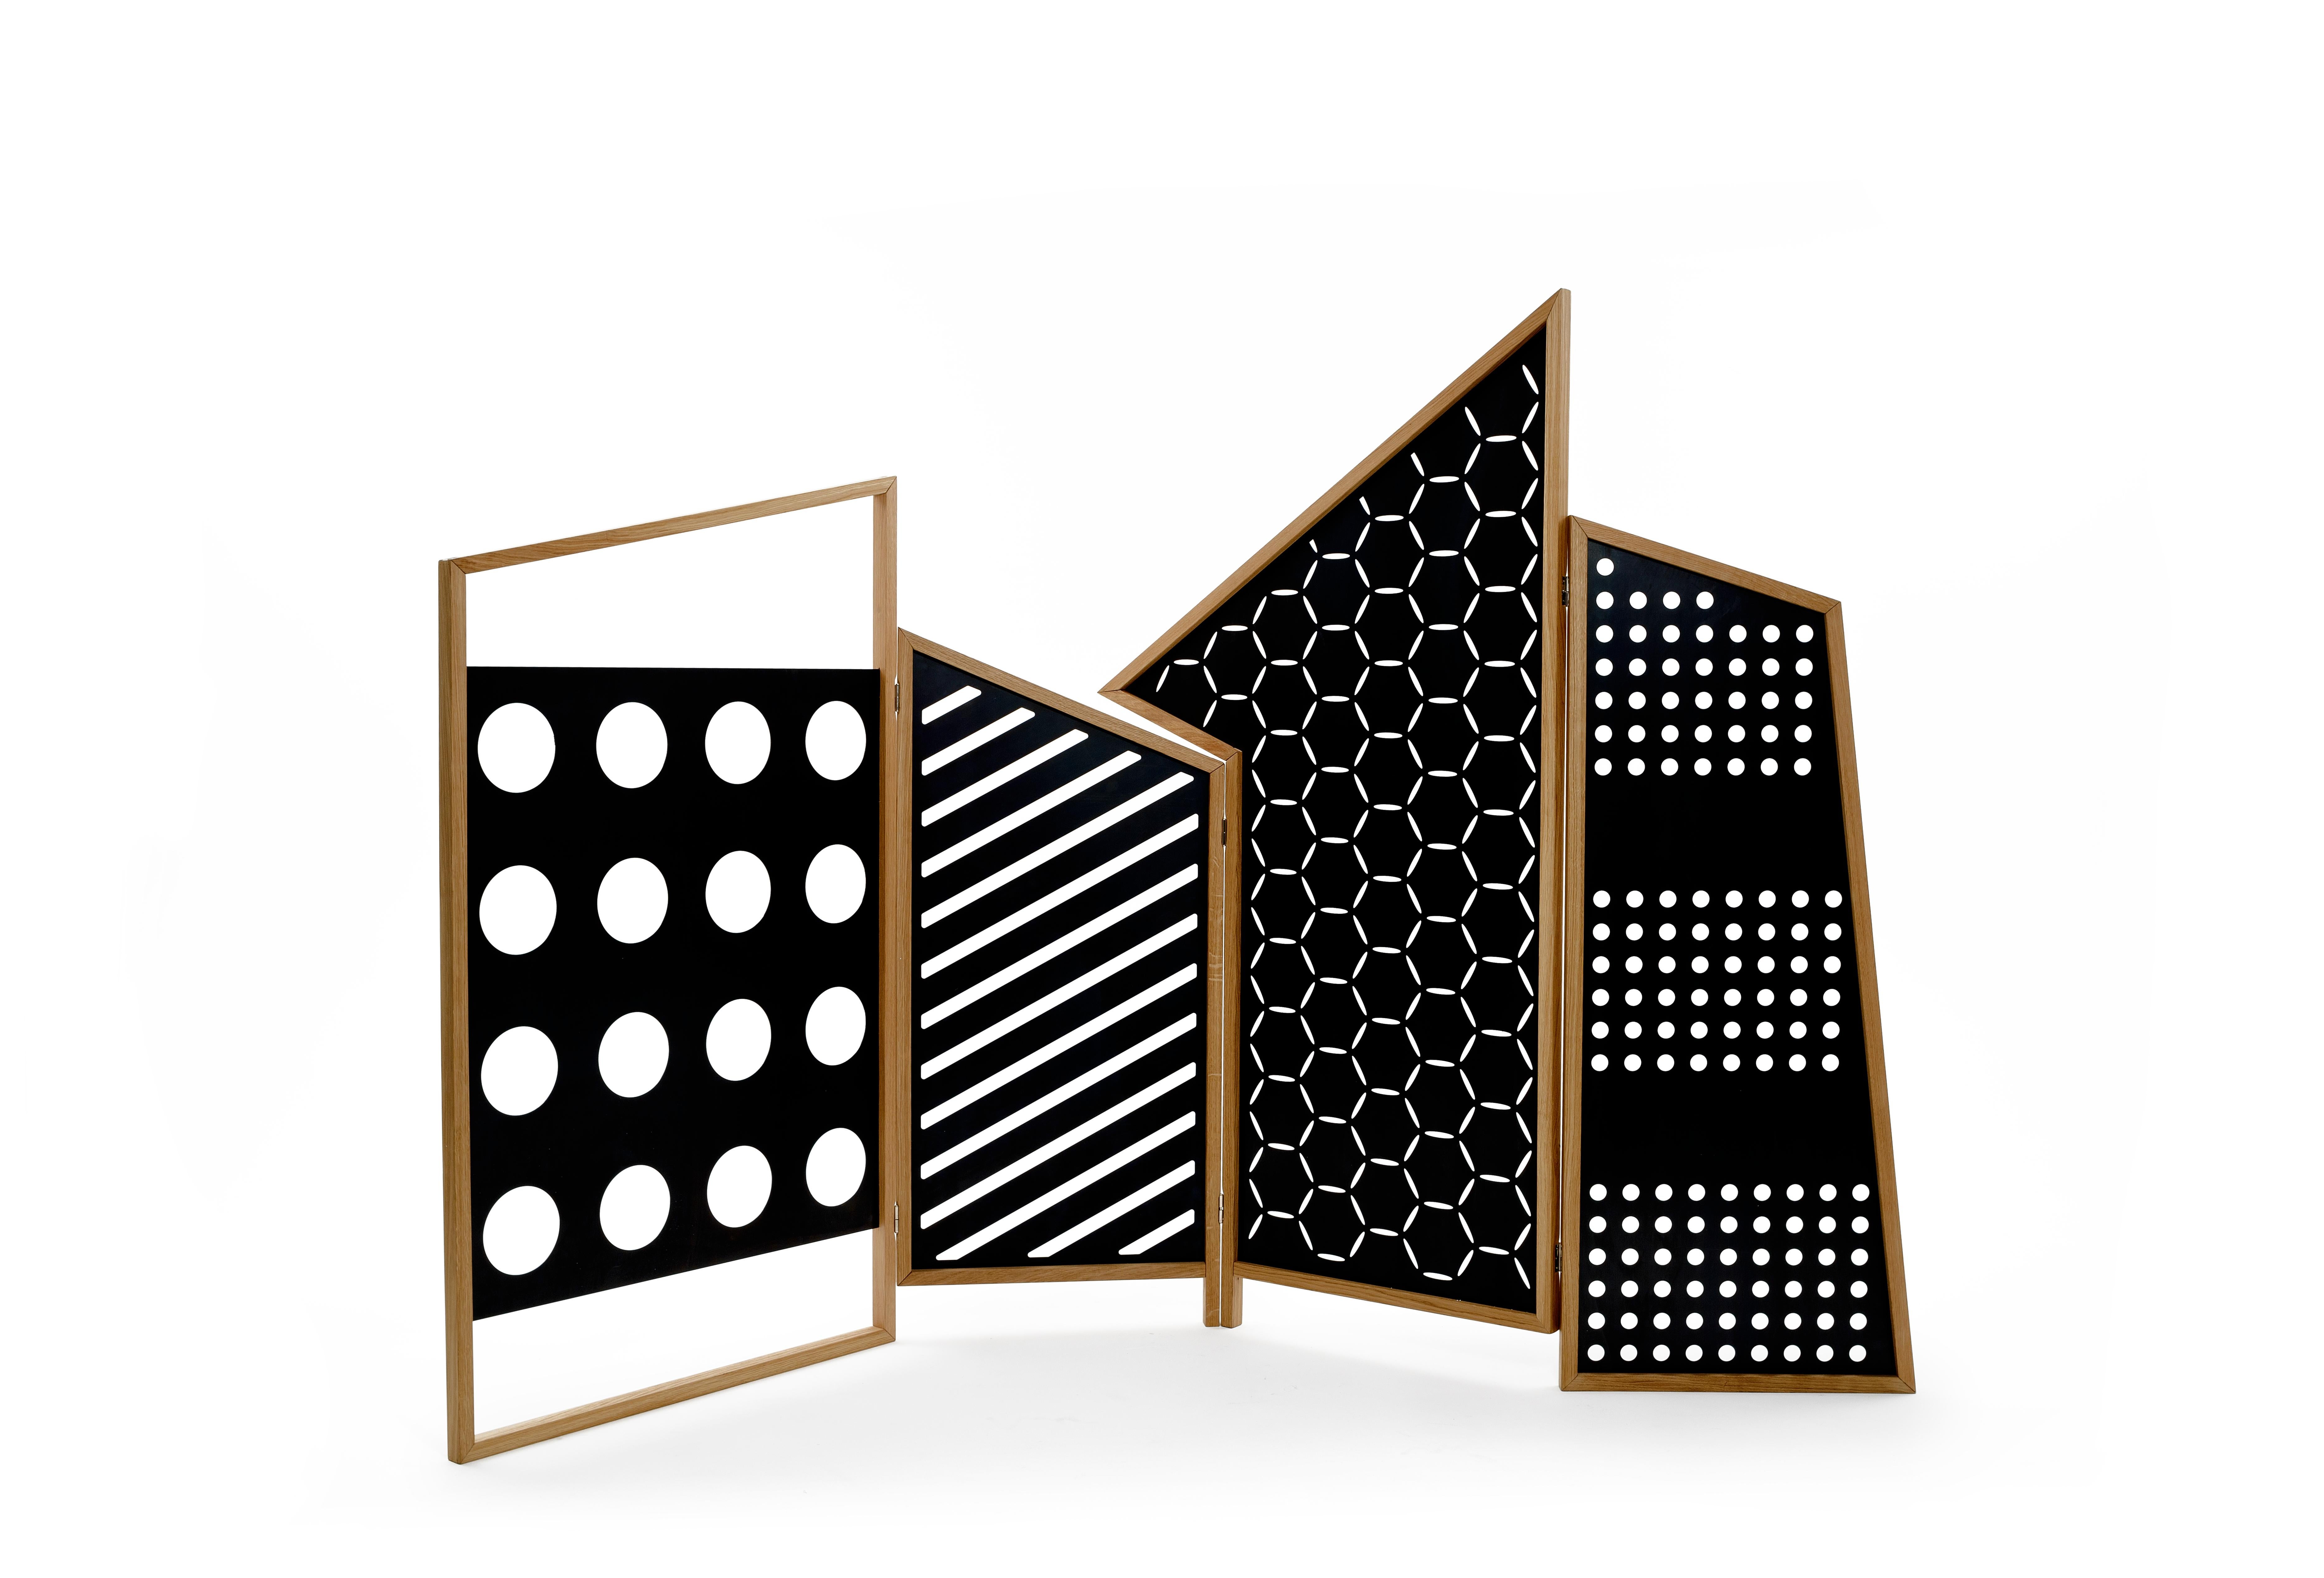 Opto Folding Screen Black Lacquered by Colé Italia with Lorenz + Kaz
Dimensions: H 200, W 300, D 4 cm
Materials: Laser-cut metal panels inside the frame, black anthracite or lacquered in four bright colors orange, green, rose, pale blue
Finishing: